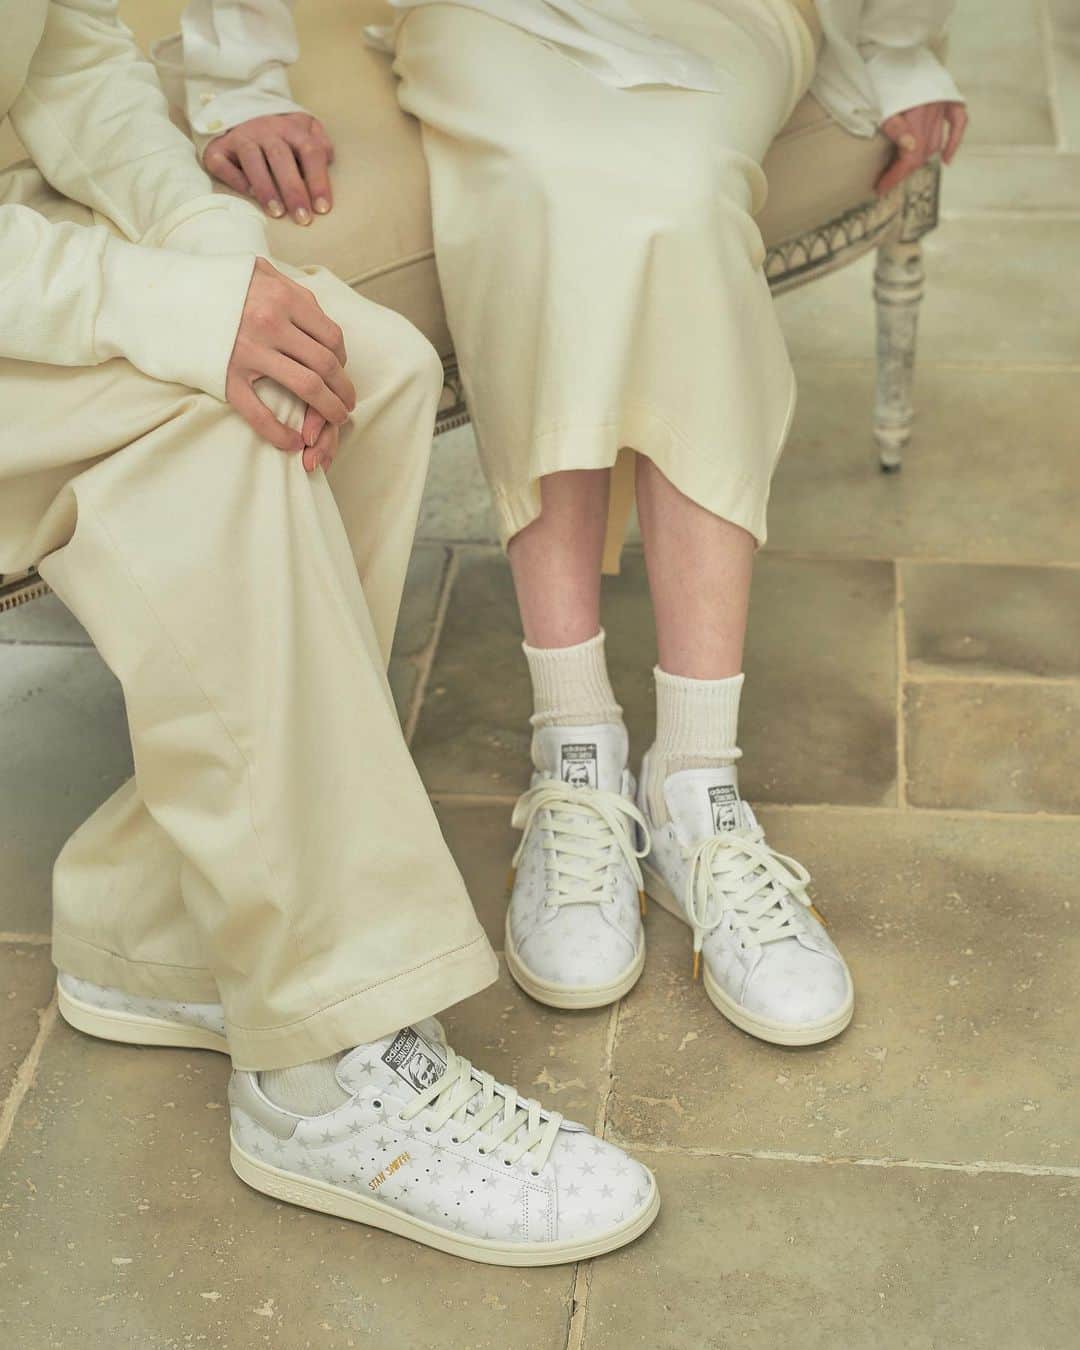 アトモスさんのインスタグラム写真 - (アトモスInstagram)「.  「adidas Originals × atmos GOLD STAR PACK」第3弾となる STAN SMITH LUX atmos が登場。  adidasを履いた数々の偉大なスターやプレーヤーからインスパイアを受けた“GOLD STAR PACK”。 今作は、adidas Originalsの代表作でもあるSTAN SMITHからPREMIUMラインのLUXシリーズを採用。 前作同様、無垢なホワイトのアッパーをベースにシルバーのスターを配置、サイドにはデボス加工に金の箔押しでSTAN SMITHと入りラグジュアリーな雰囲気を表現します。パンチングのスリーストライプスとアイコニックでクリーンなシルエットはそのままにしっとりとソフトなライニングで、精緻なクラフツマンシップとプレミアムなディテールが光る一足です。  本商品は2023年4⽉18⽇(火)よりatmosオンライン、atmos/atmos pink ZOZOTOWNにて先行発売。4⽉25⽇(火)よりA.T.A.D、atmos 各店（一部店舗除く）にて発売致します。  The third edition of the "adidas Originals x atmos GOLD STAR PACK" STAN SMITH LUX atmos is now available.  The "GOLD STAR PACK" is inspired by the many great stars and players who have worn adidas shoes. This time, the LUX series from the PREMIUM line of STAN SMITH, one of adidas Originals' flagship products, has been adopted. As in the previous work, a silver star is placed on a solid white upper base, and STAN SMITH is debossed and stamped in gold foil on the side, expressing a luxurious atmosphere. The perforated three stripes and iconic clean silhouette remain intact with a moist and soft lining, and the pair shines with exquisite craftsmanship and premium detailing.  This product will be available at atmos online and atmos/atmos pink ZOZOTOWN from April 18, 2023 and at A.T.A.D and atmos stores from April 25, 2023 (excluding some stores).  #atmos #adidas #stansmith #stansmithlux #goldstarpack」4月11日 17時00分 - atmos_japan